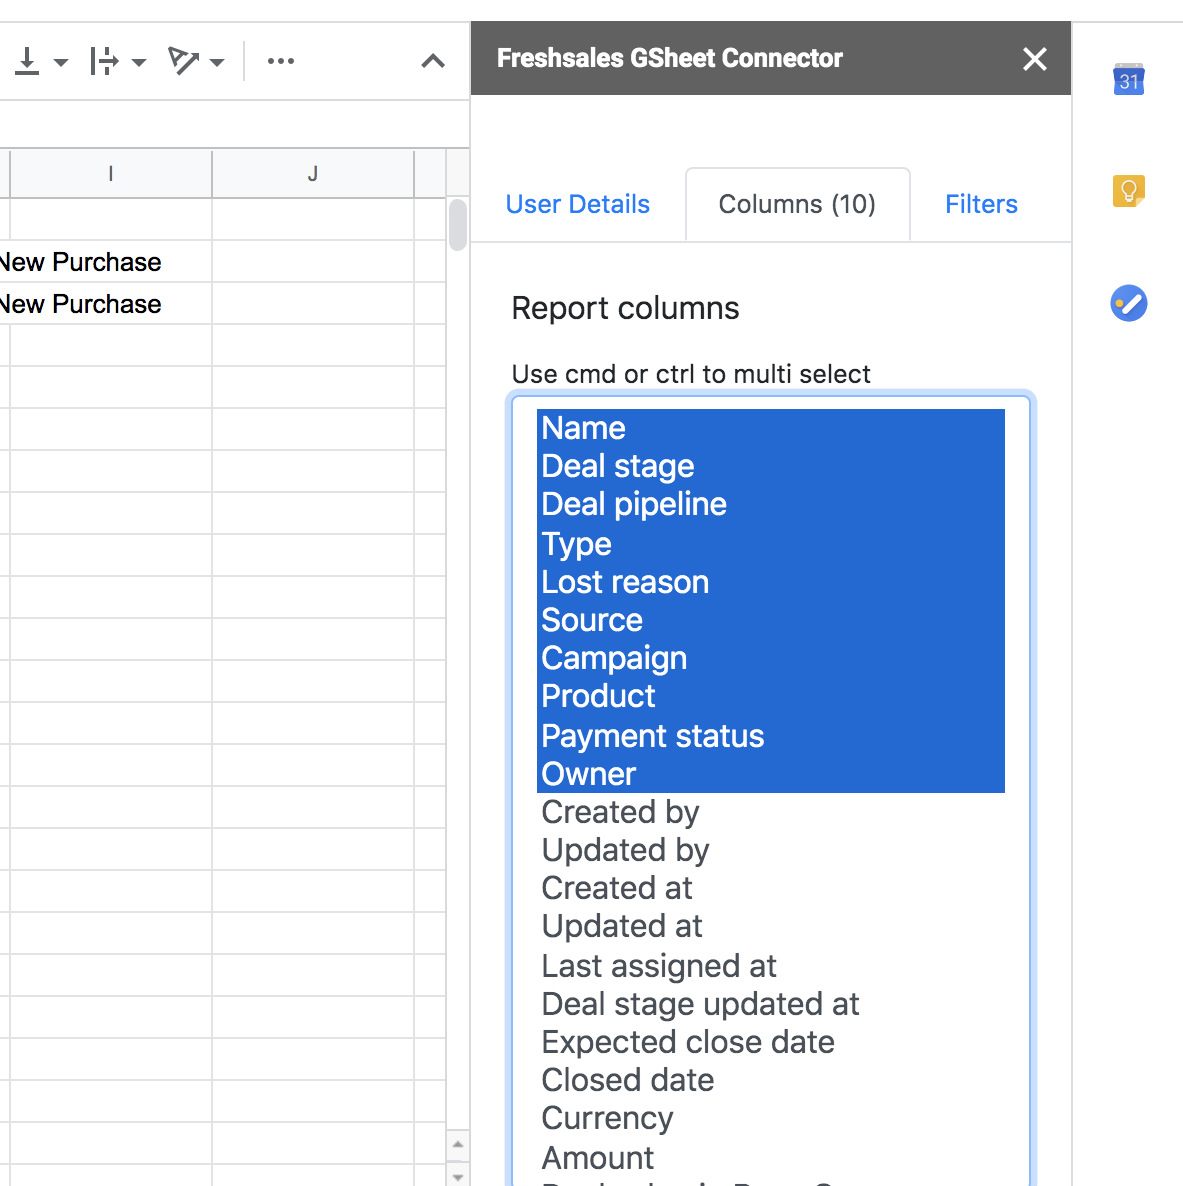 Freshsales Google Sheet Connector How to use